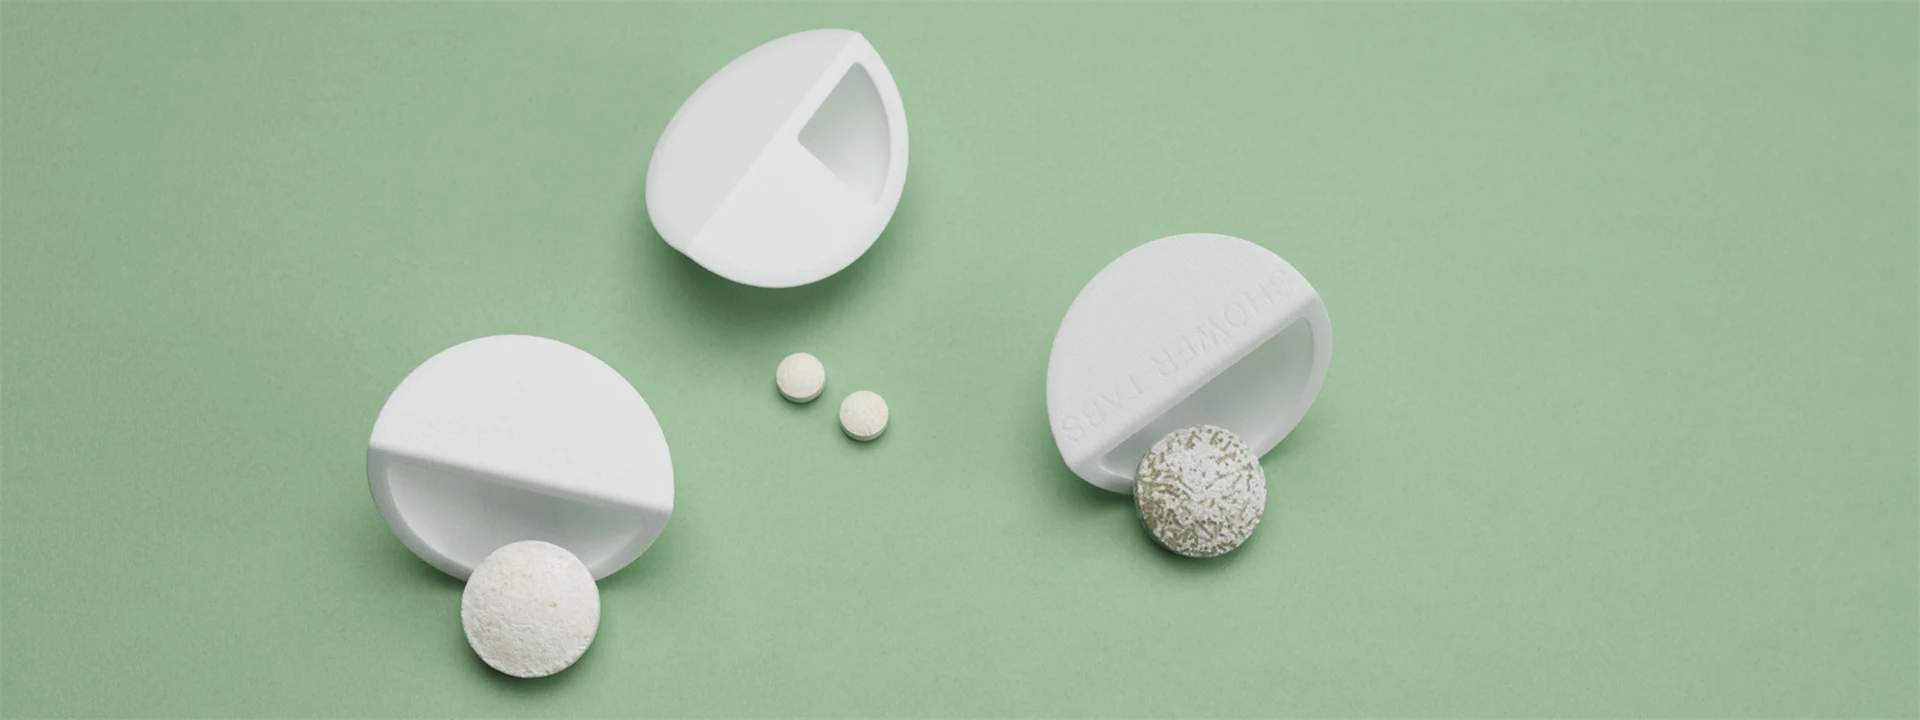 White wood-based packaging with dissolvable tablets on green background